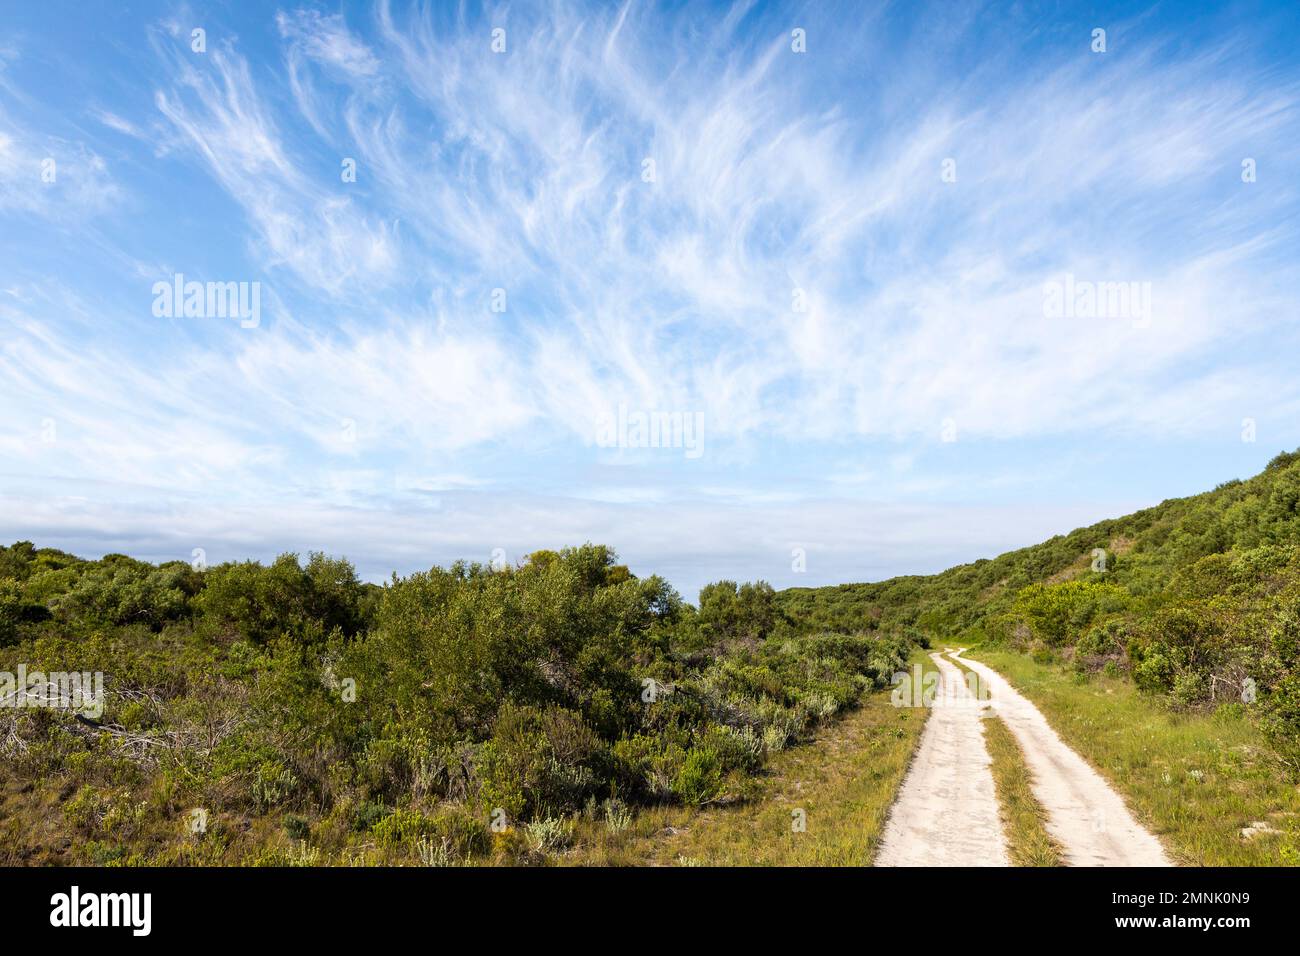 South Africa, Stanford, Dirt road and green foliage under blue sky Stock Photo